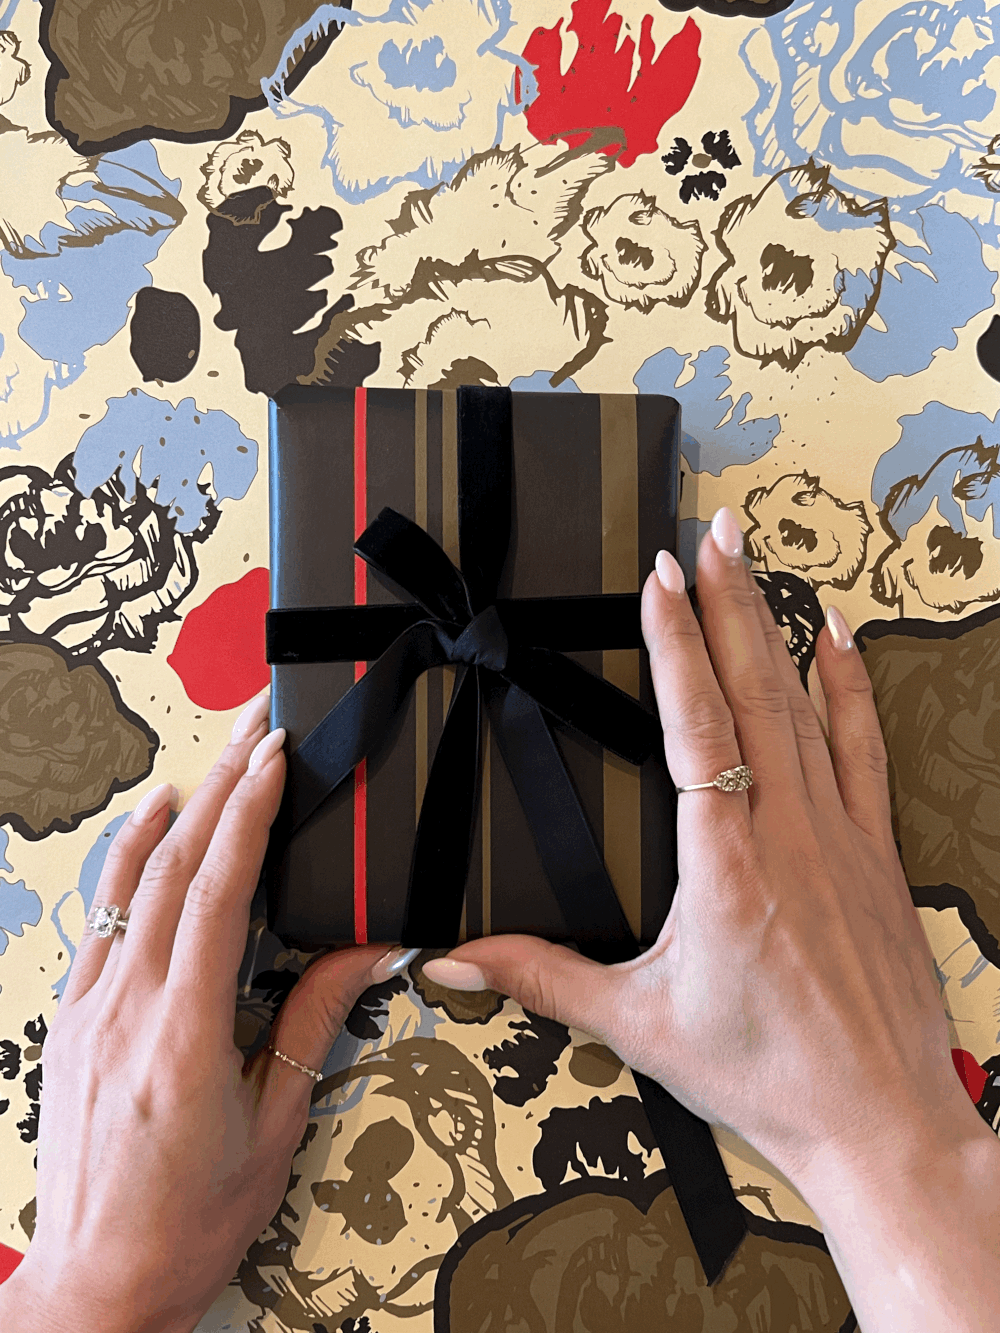 Crisp Olive™ Boutique— Double sided floral + striped wrapping paper